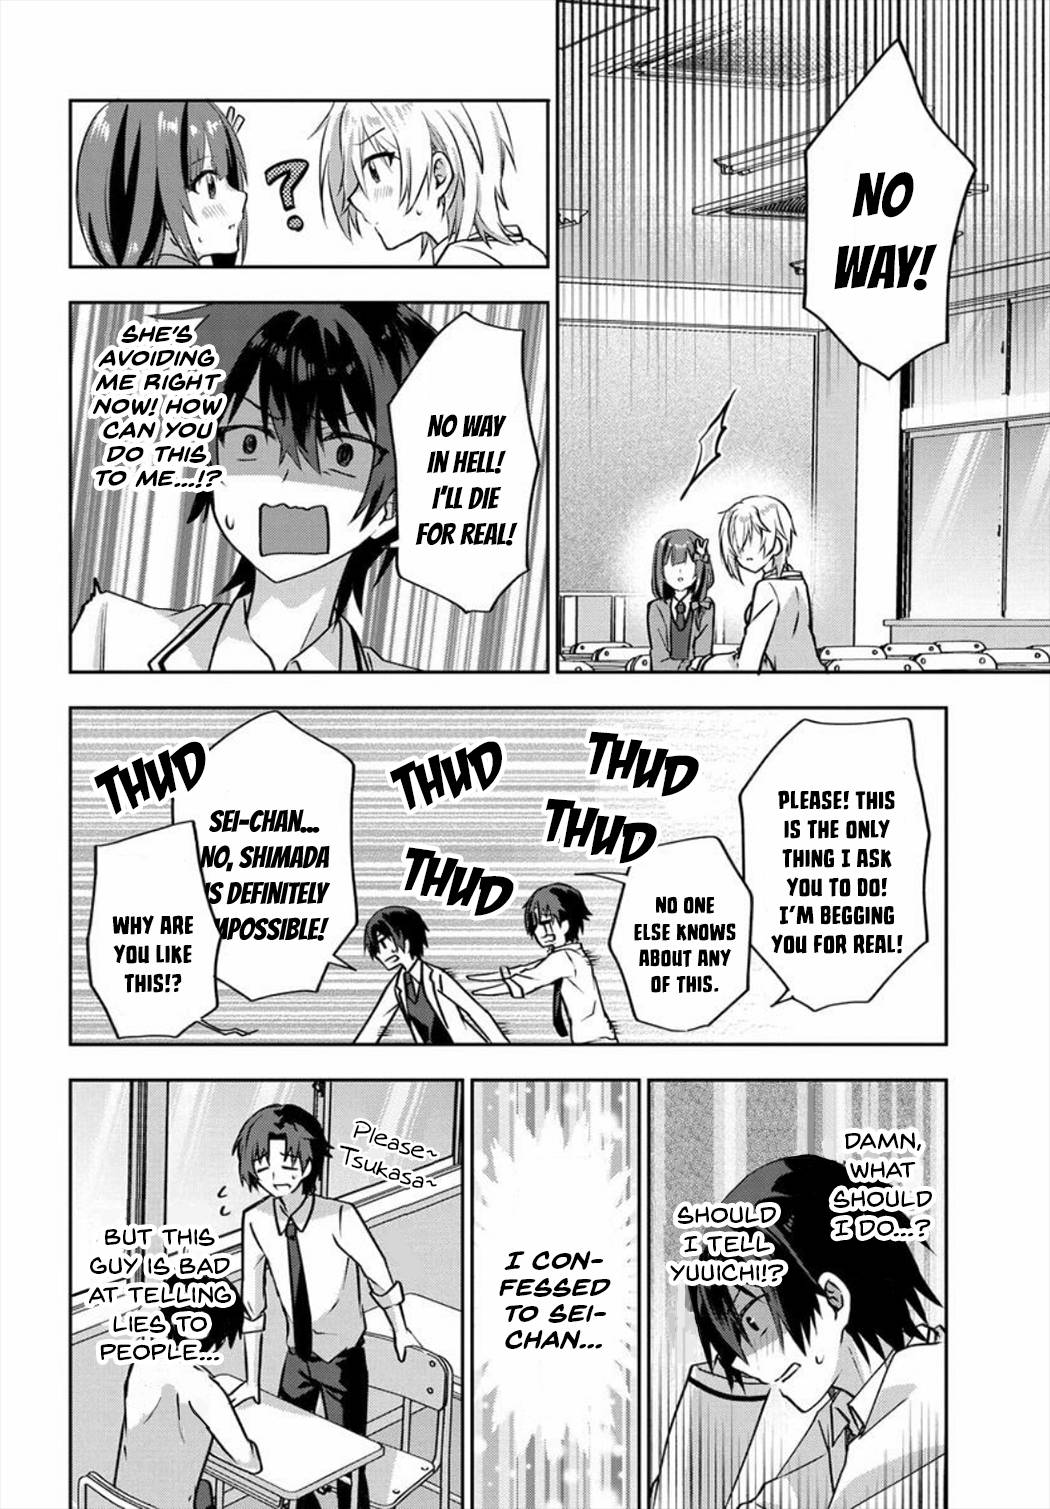 Since I’Ve Entered The World Of Romantic Comedy Manga, I’Ll Do My Best To Make The Losing Heroine Happy - chapter 3.2 - #3